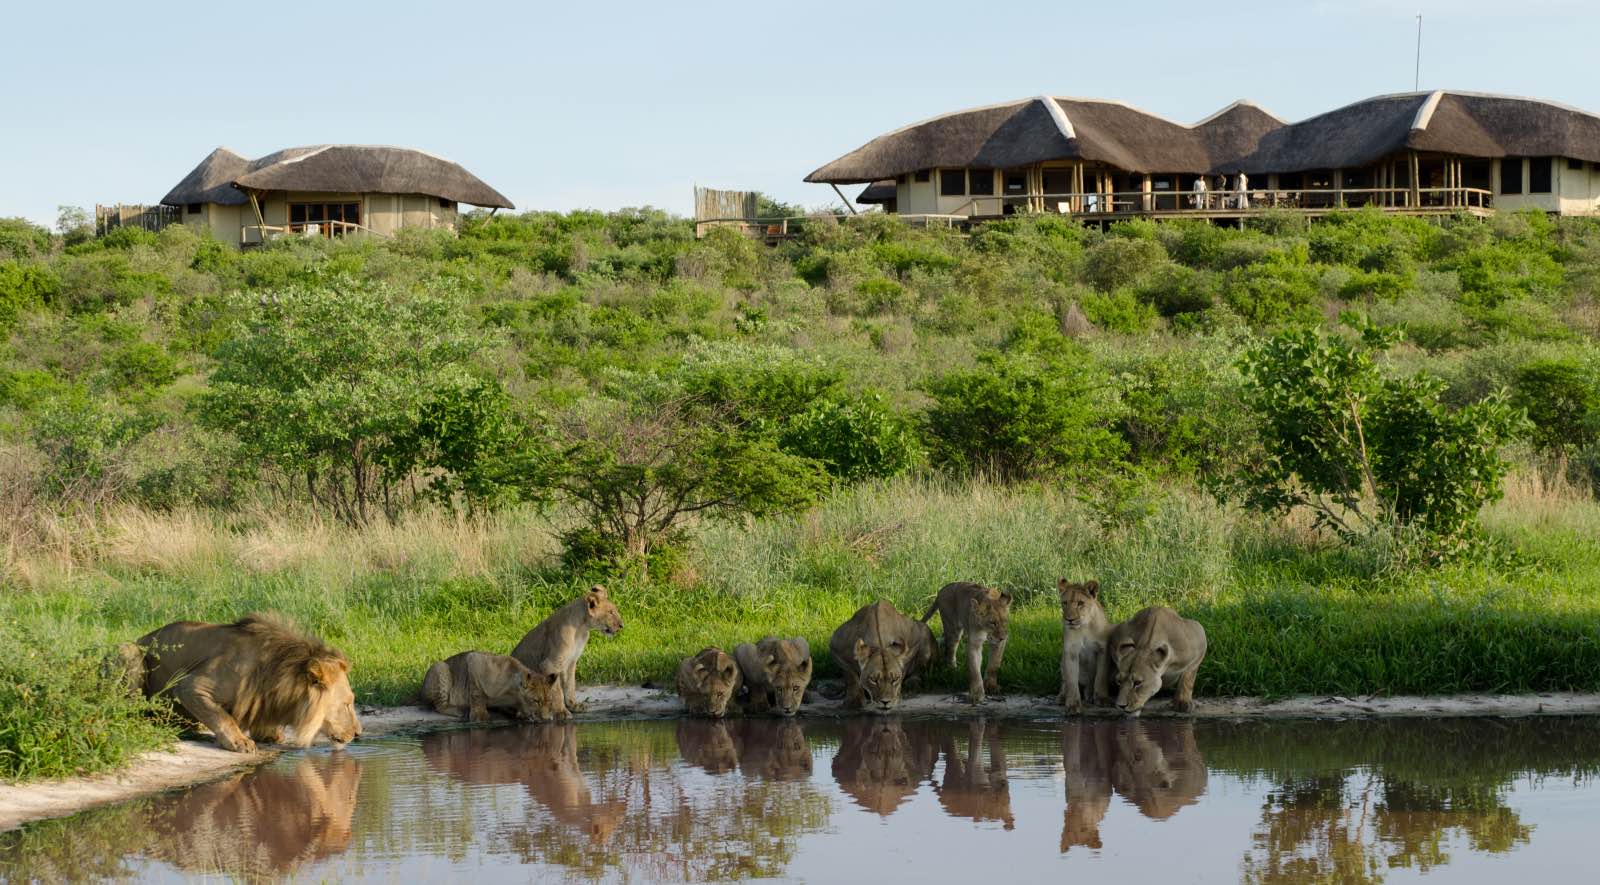 Pride of lions drinking at the pan in front of Tau Pan Camp - exactly why this Kalahari lodge was given its name